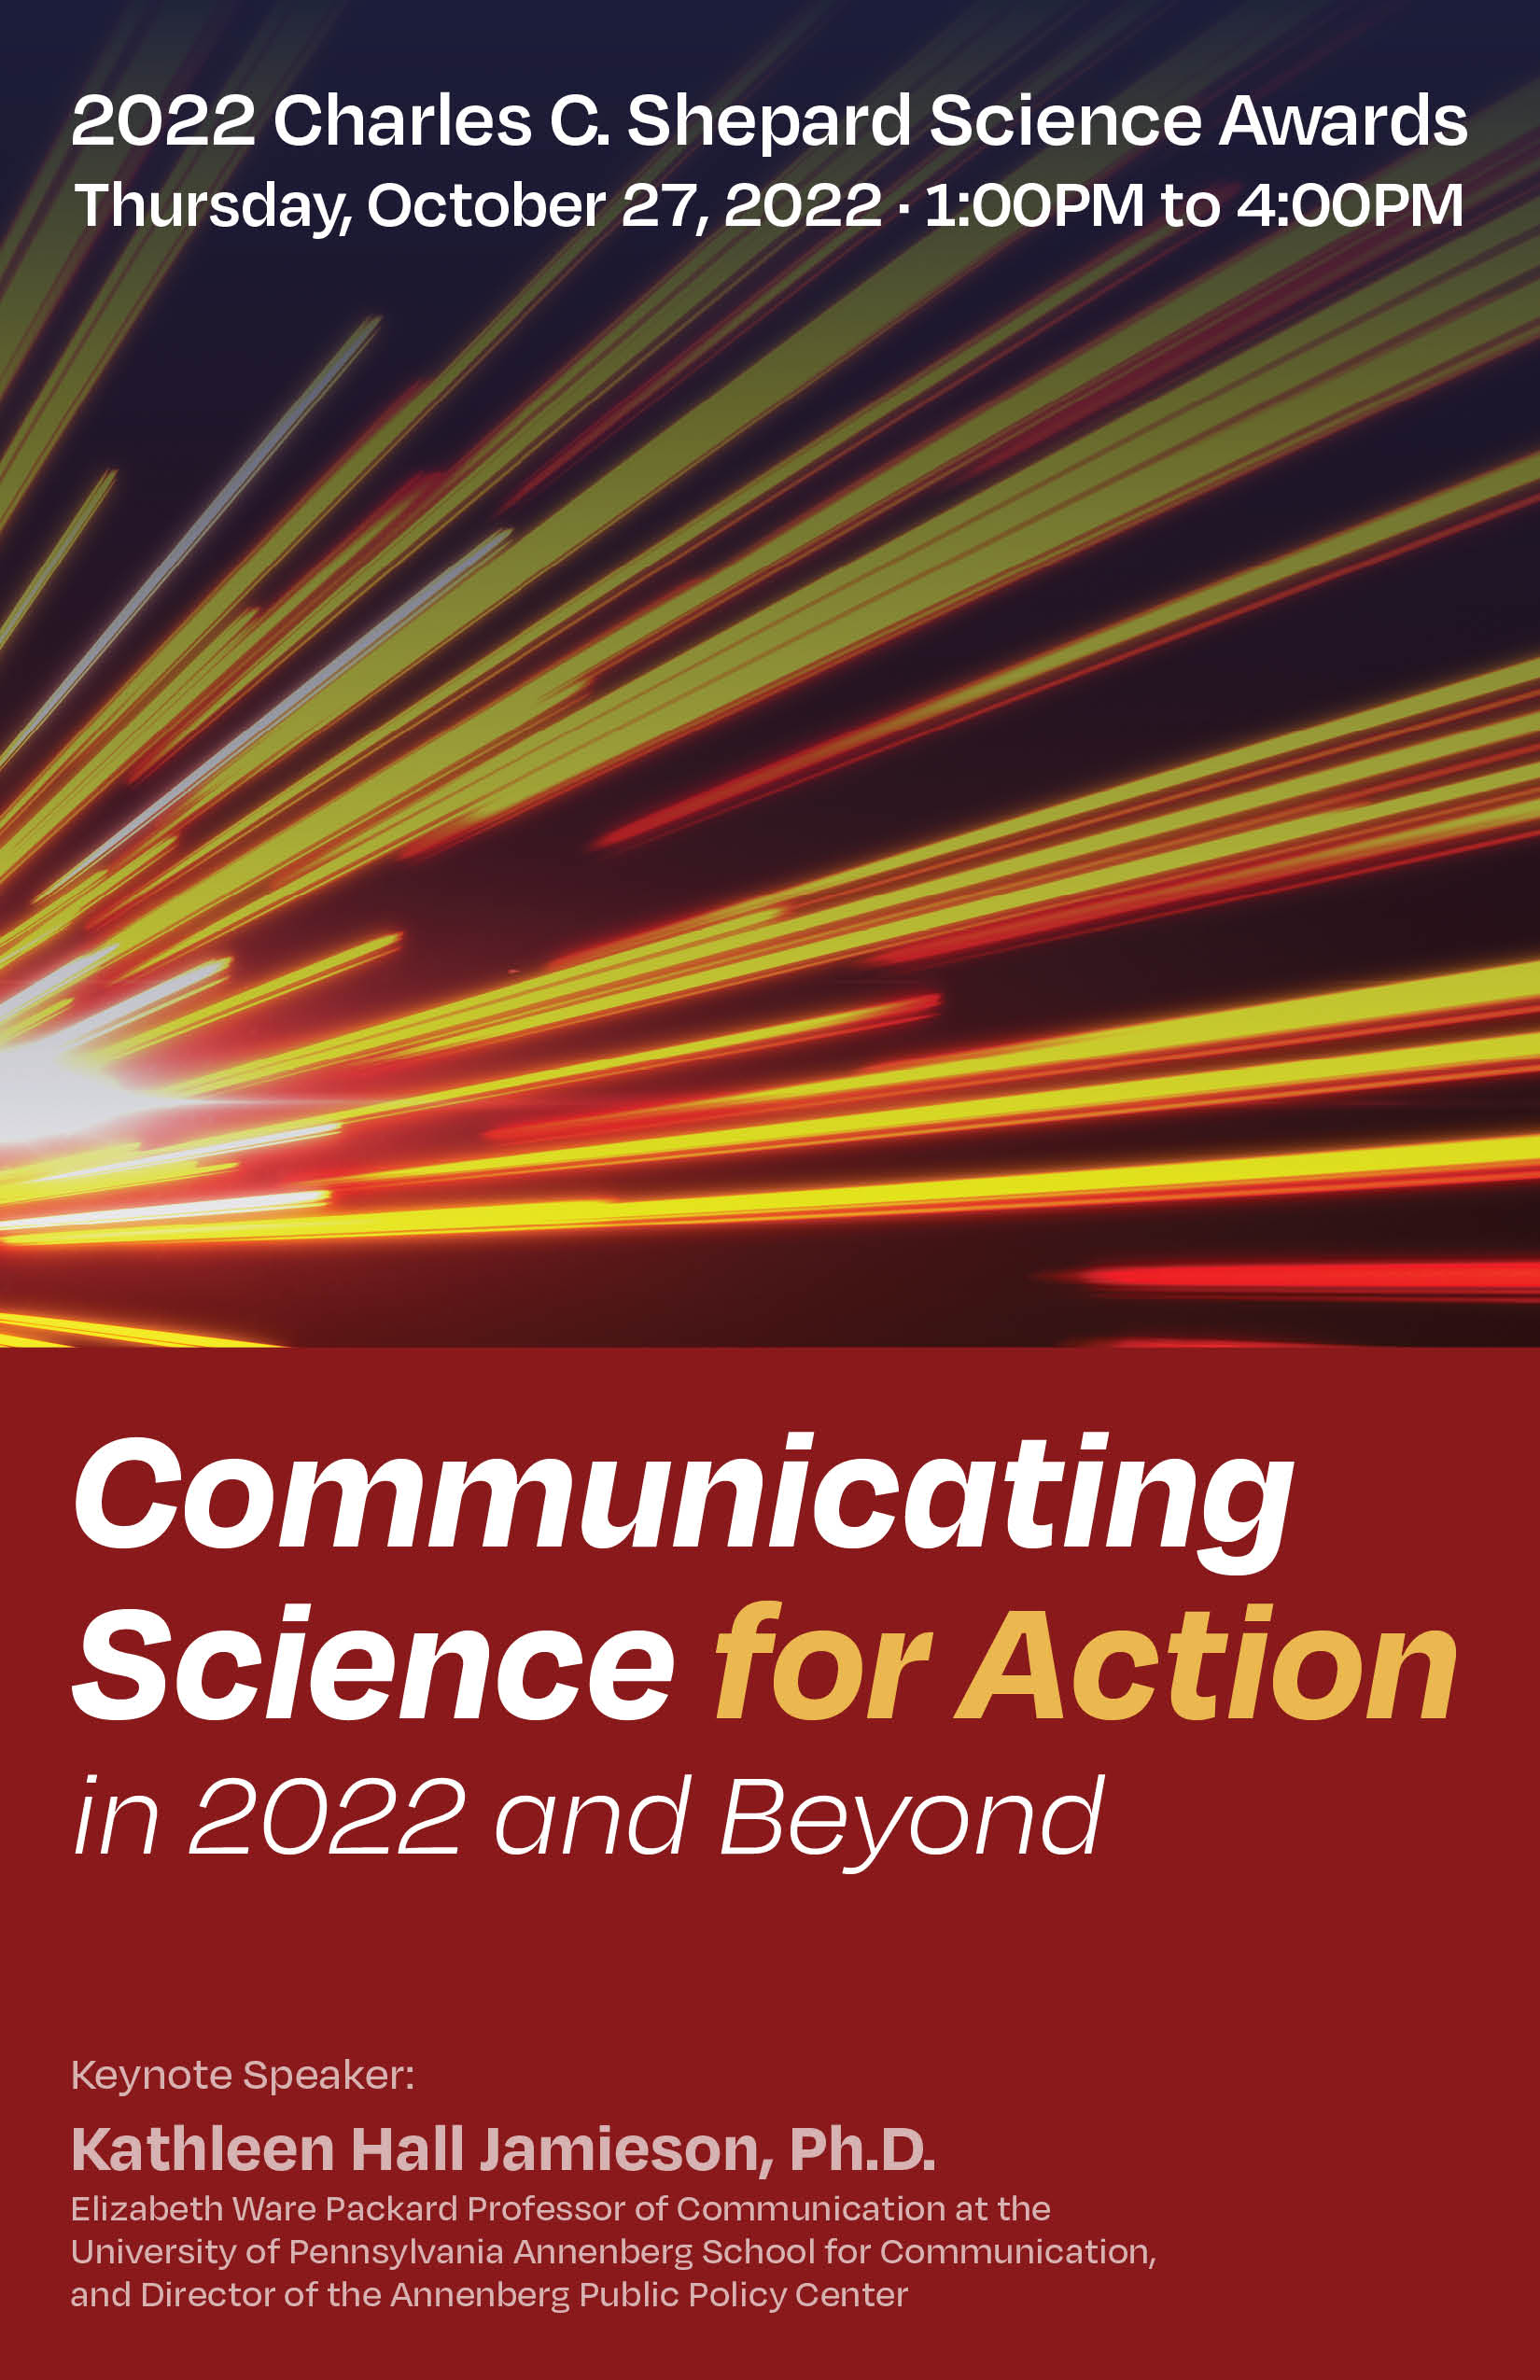 Communicating Science for Action in 2022 and Beyond